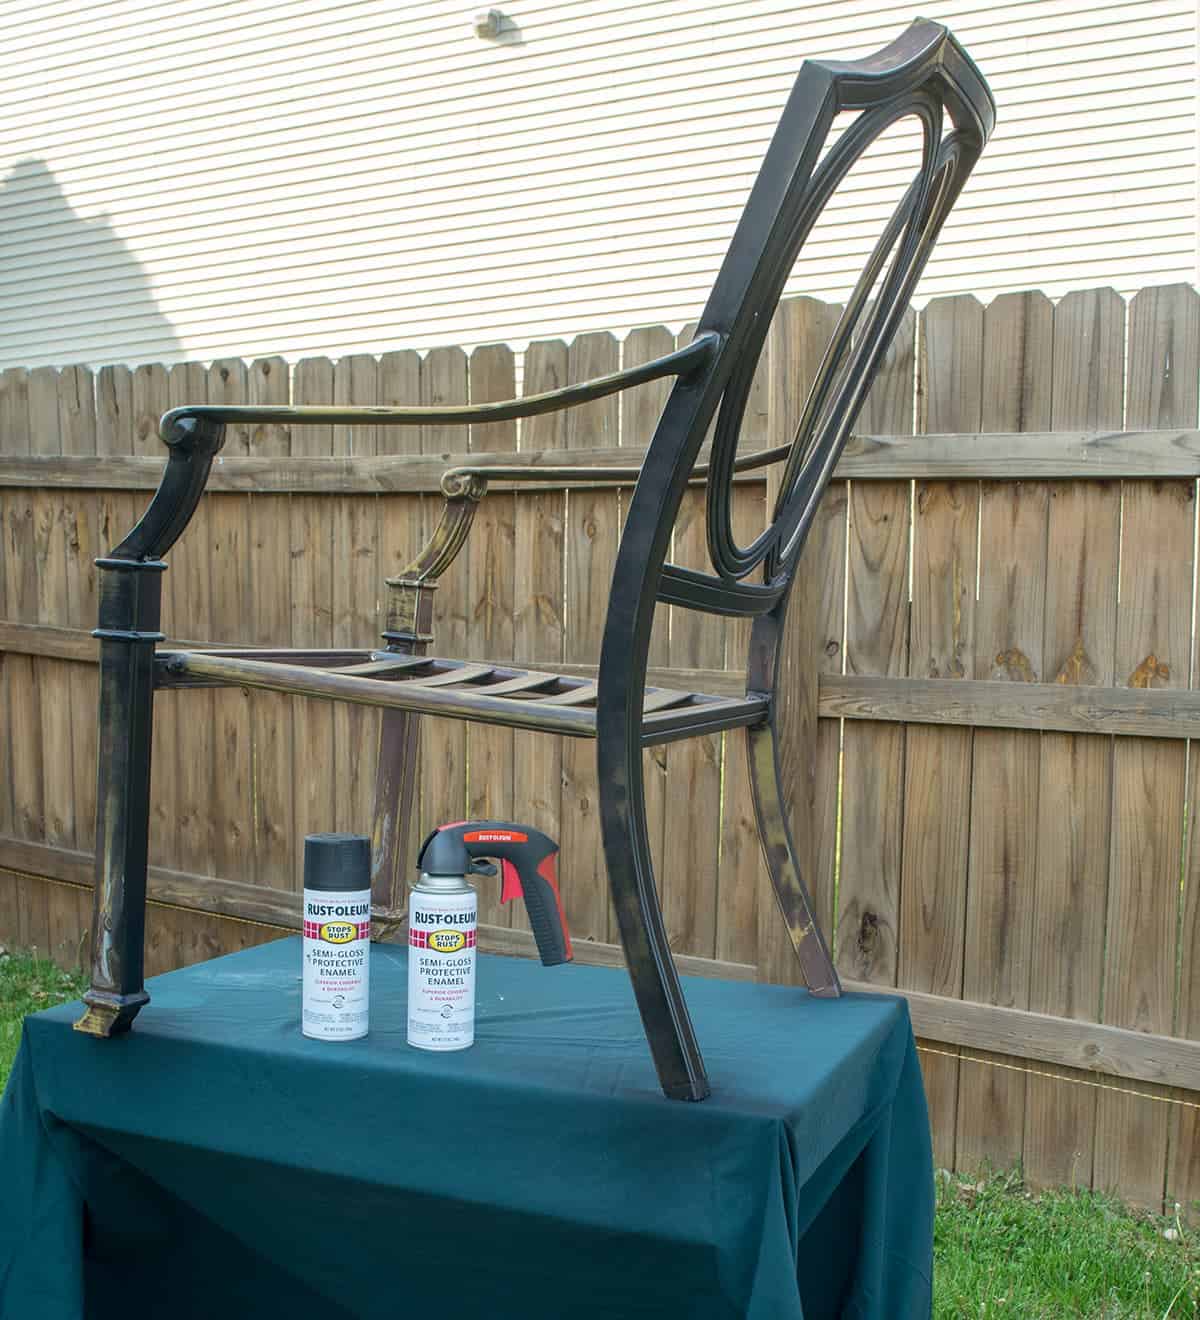 How To Spray Paint Outdoor Furniture, How To Clean Metal Patio Furniture Before Painting